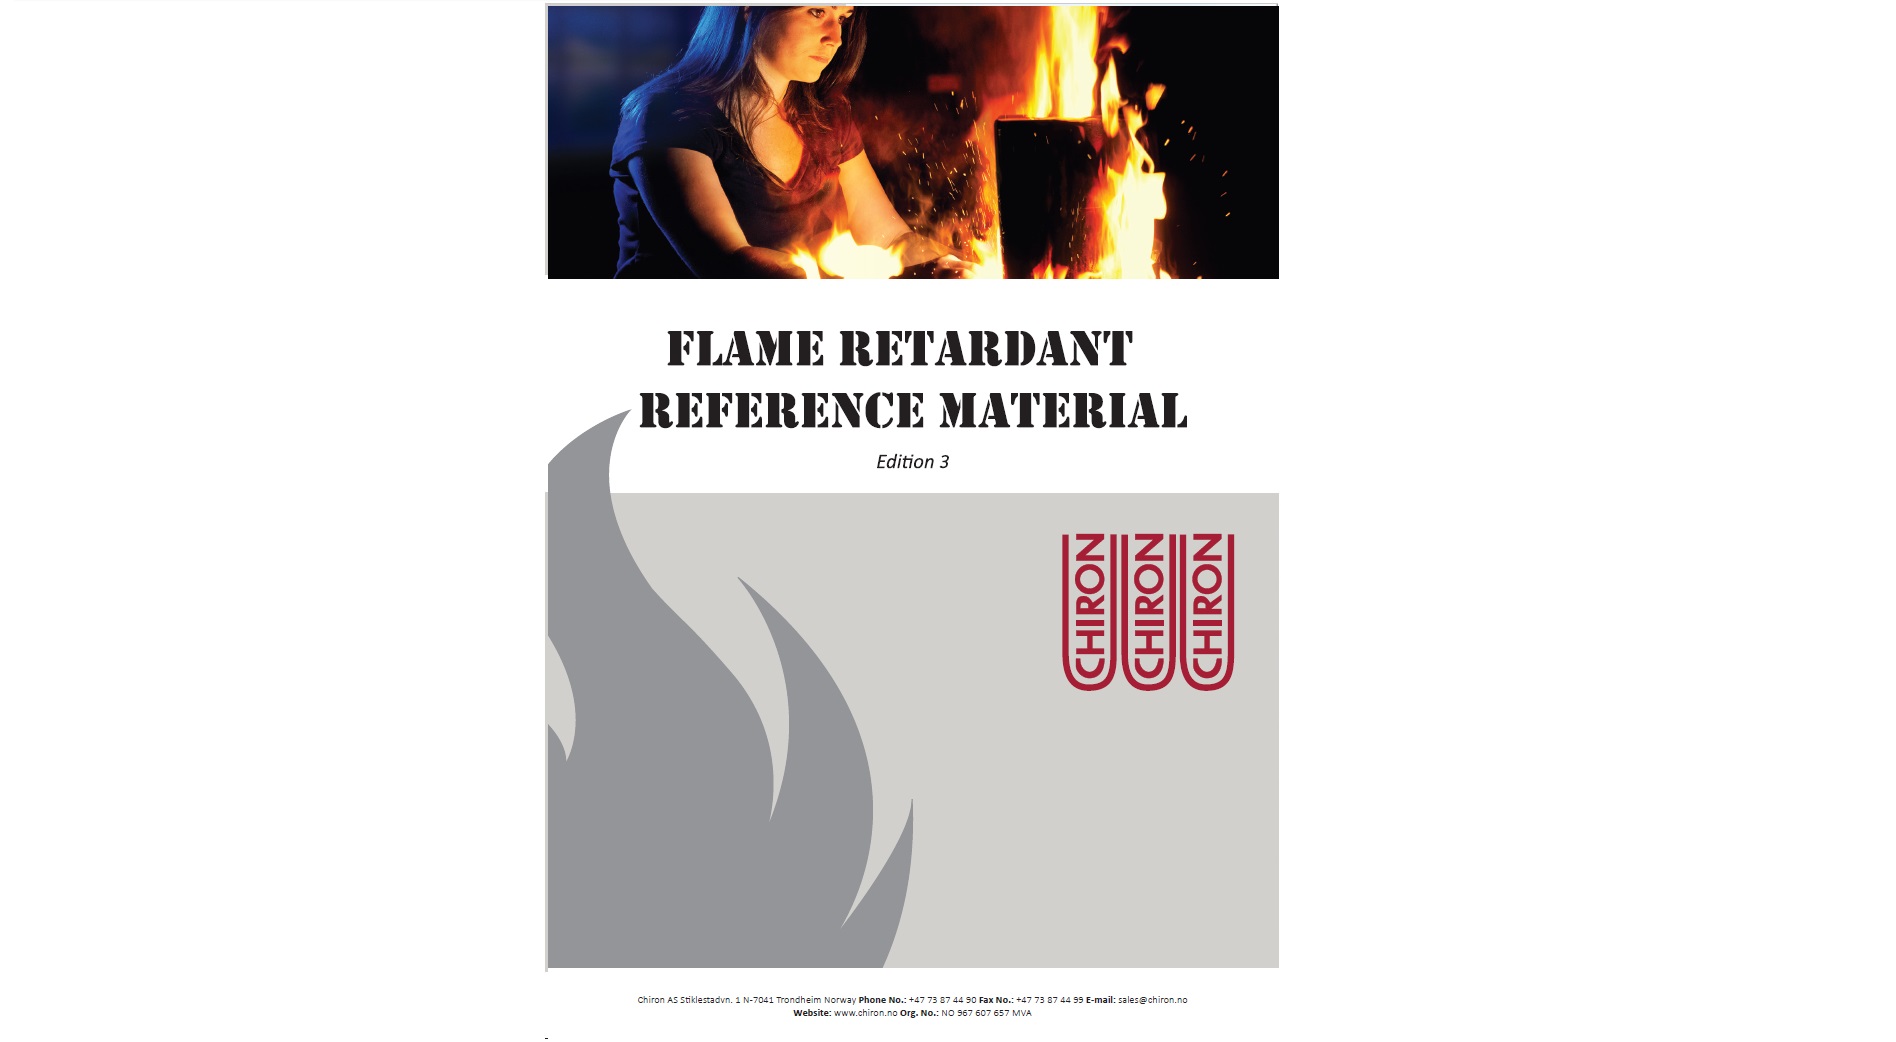 Flame retardant reference material, Edition 3